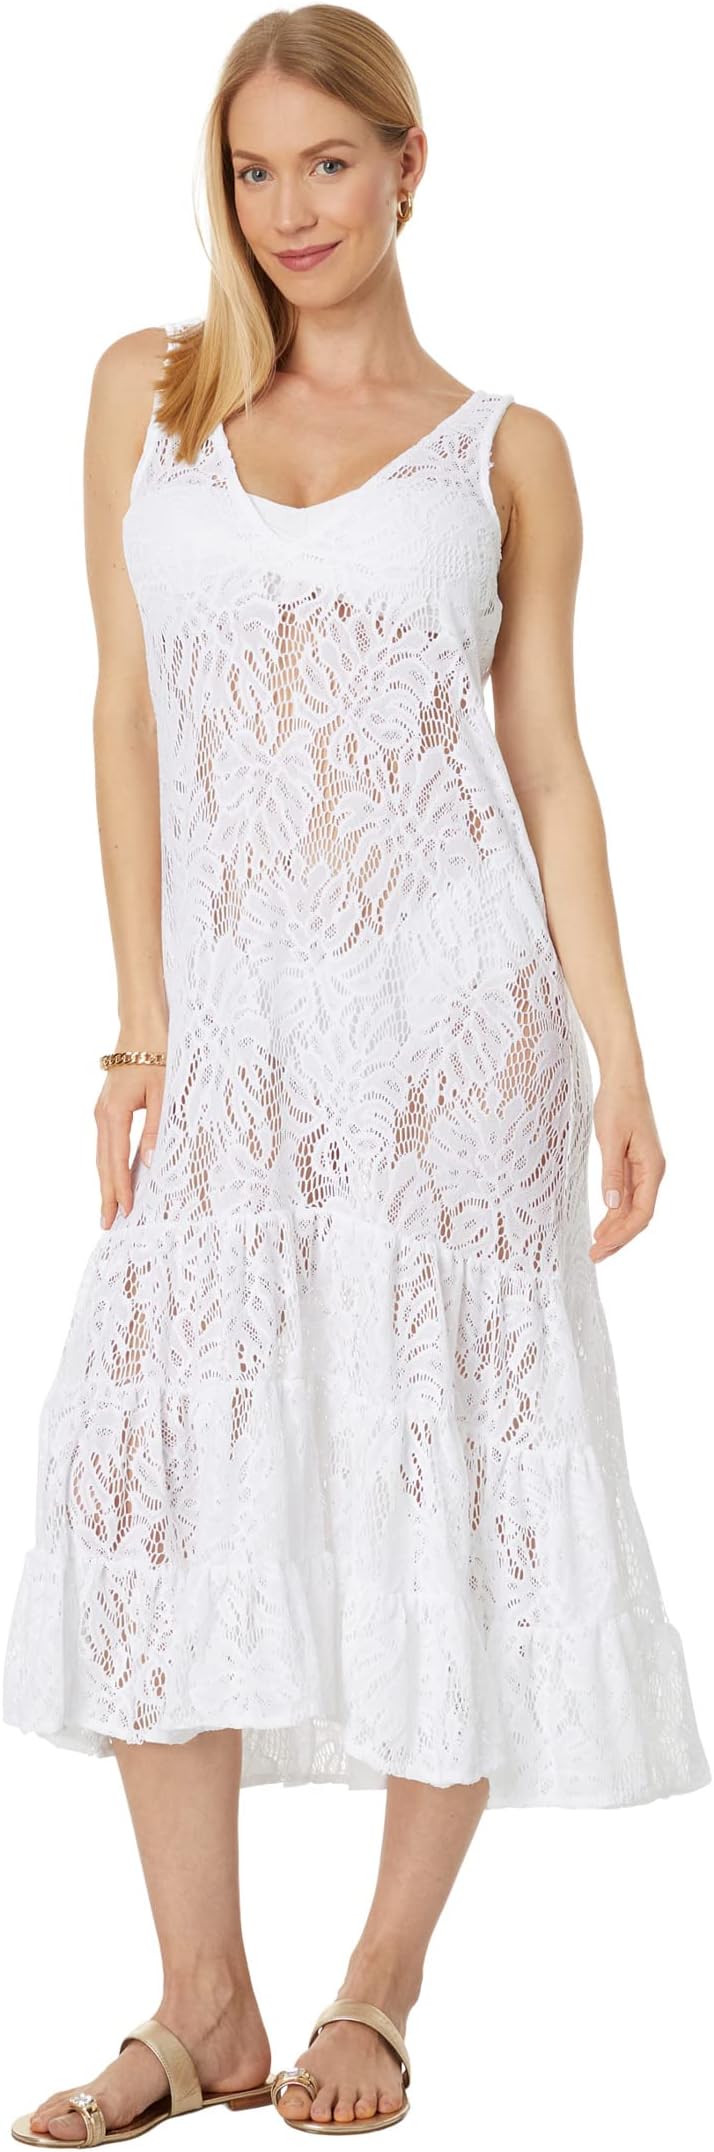 palm paradise resort Накидка Finnley Lace Cover-Up Lilly Pulitzer, цвет Resort White Paradise Found Lace